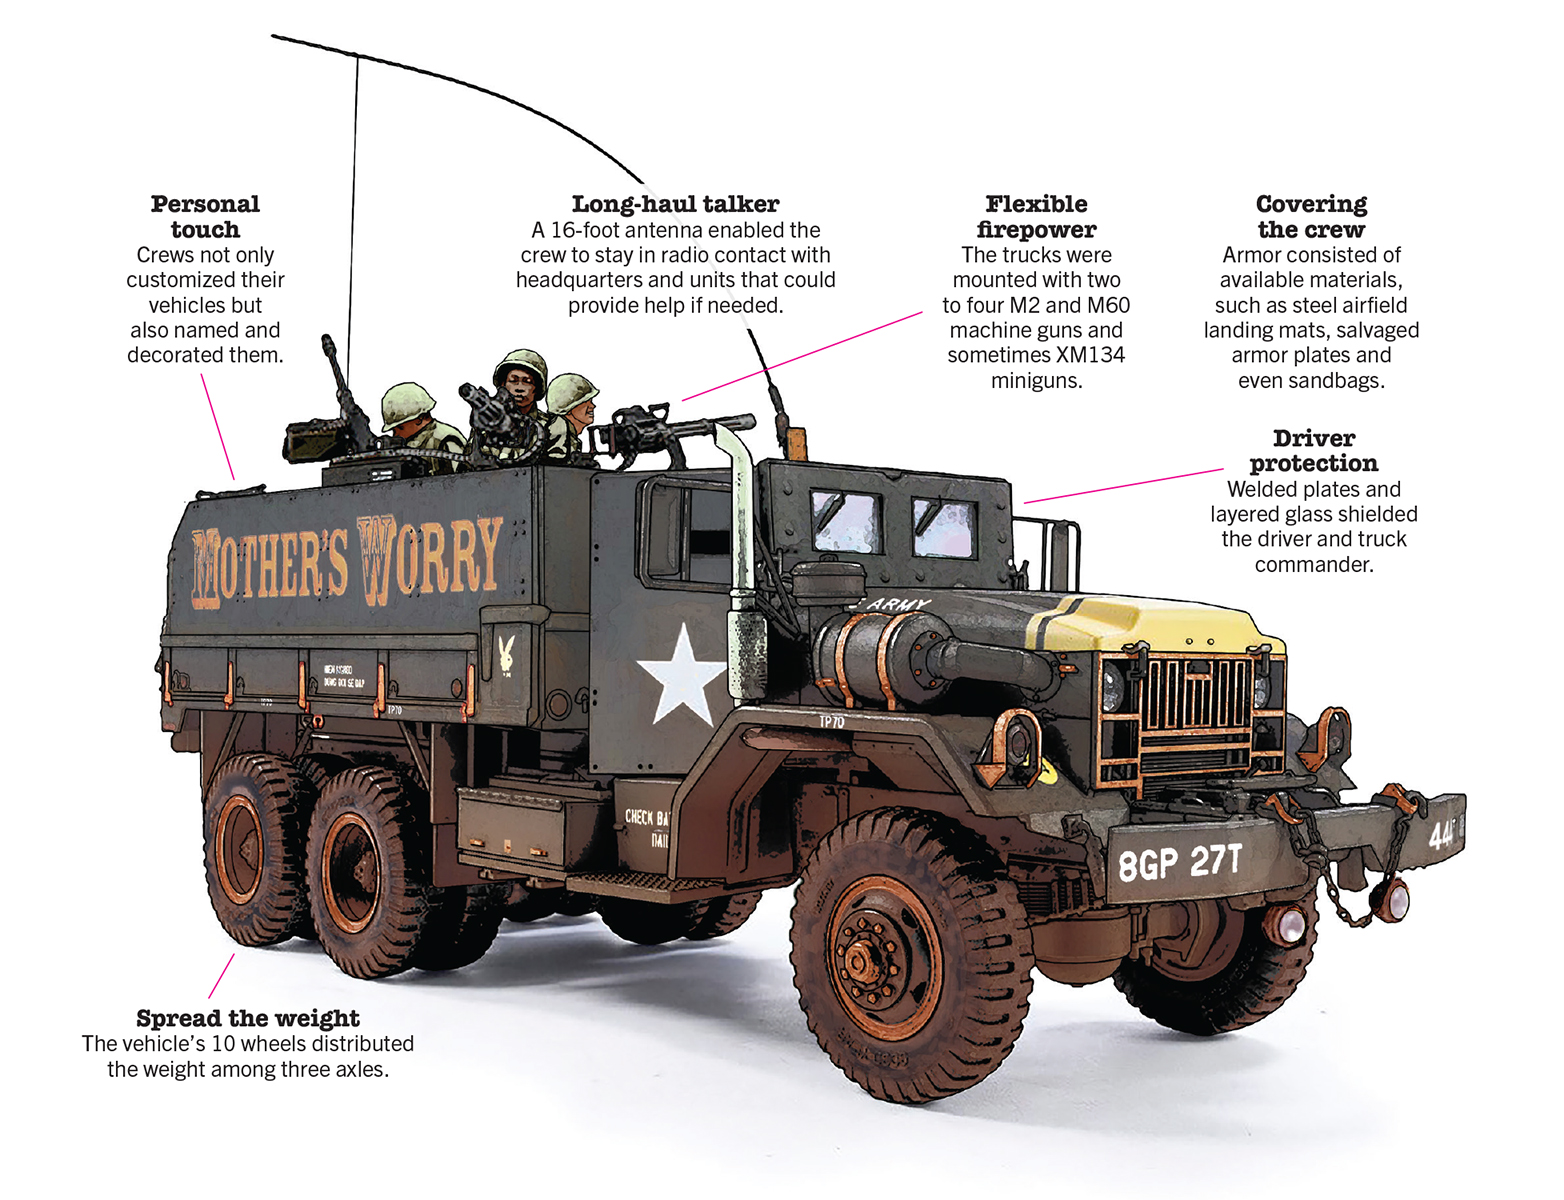 M54 Gun Truck: The Savior of the Support Convoy